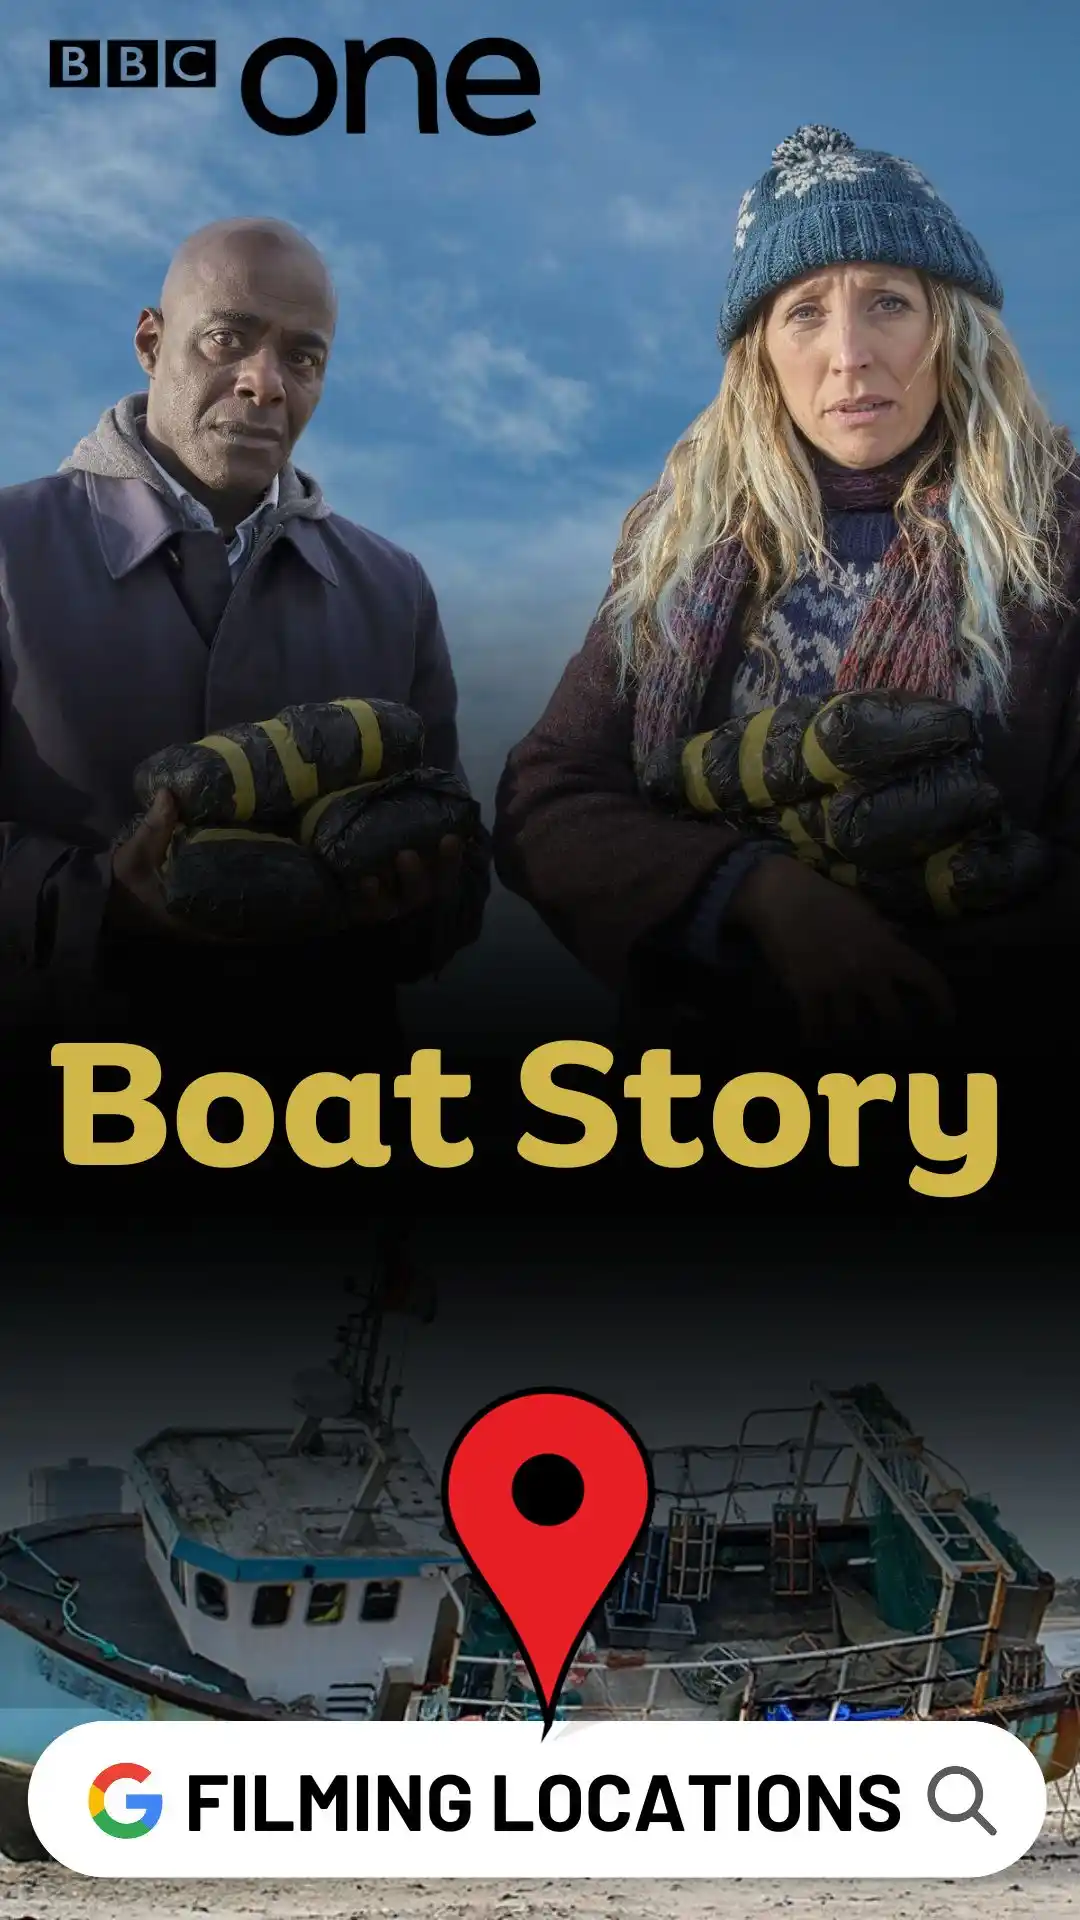 Boat Story Filming Locations